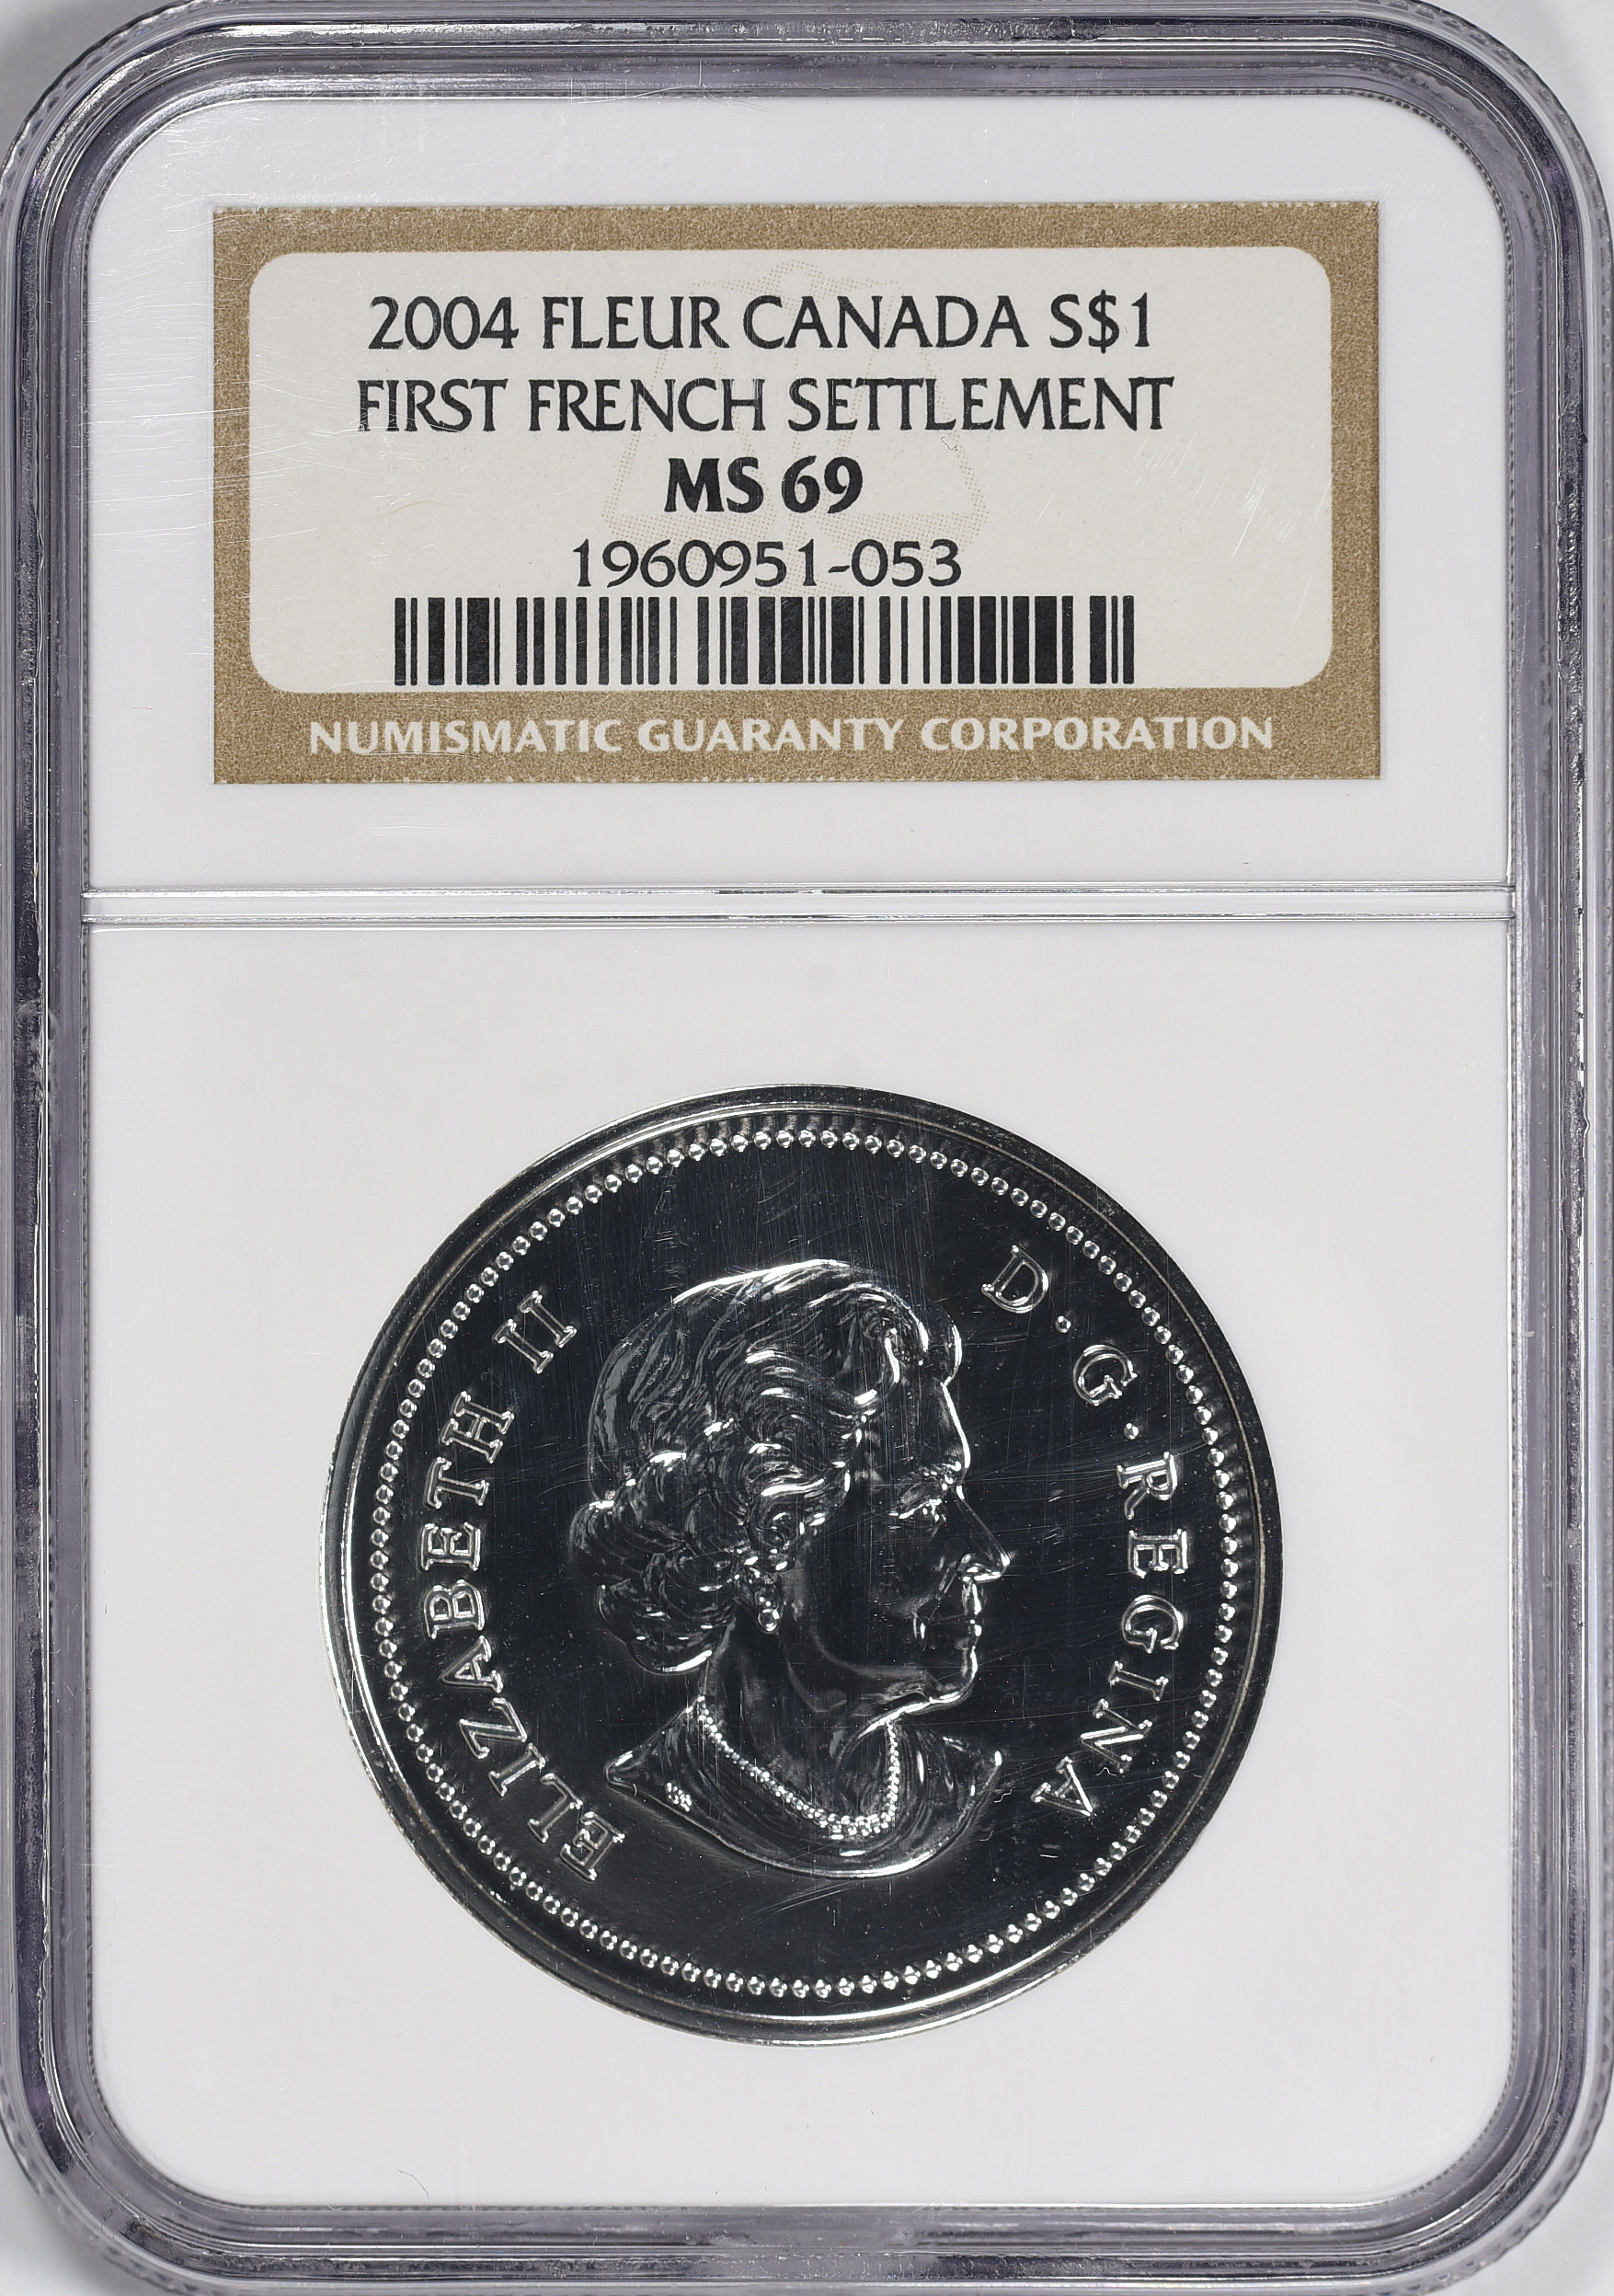 C105 2004 Canadian silver dollar First French Settlement with Fl